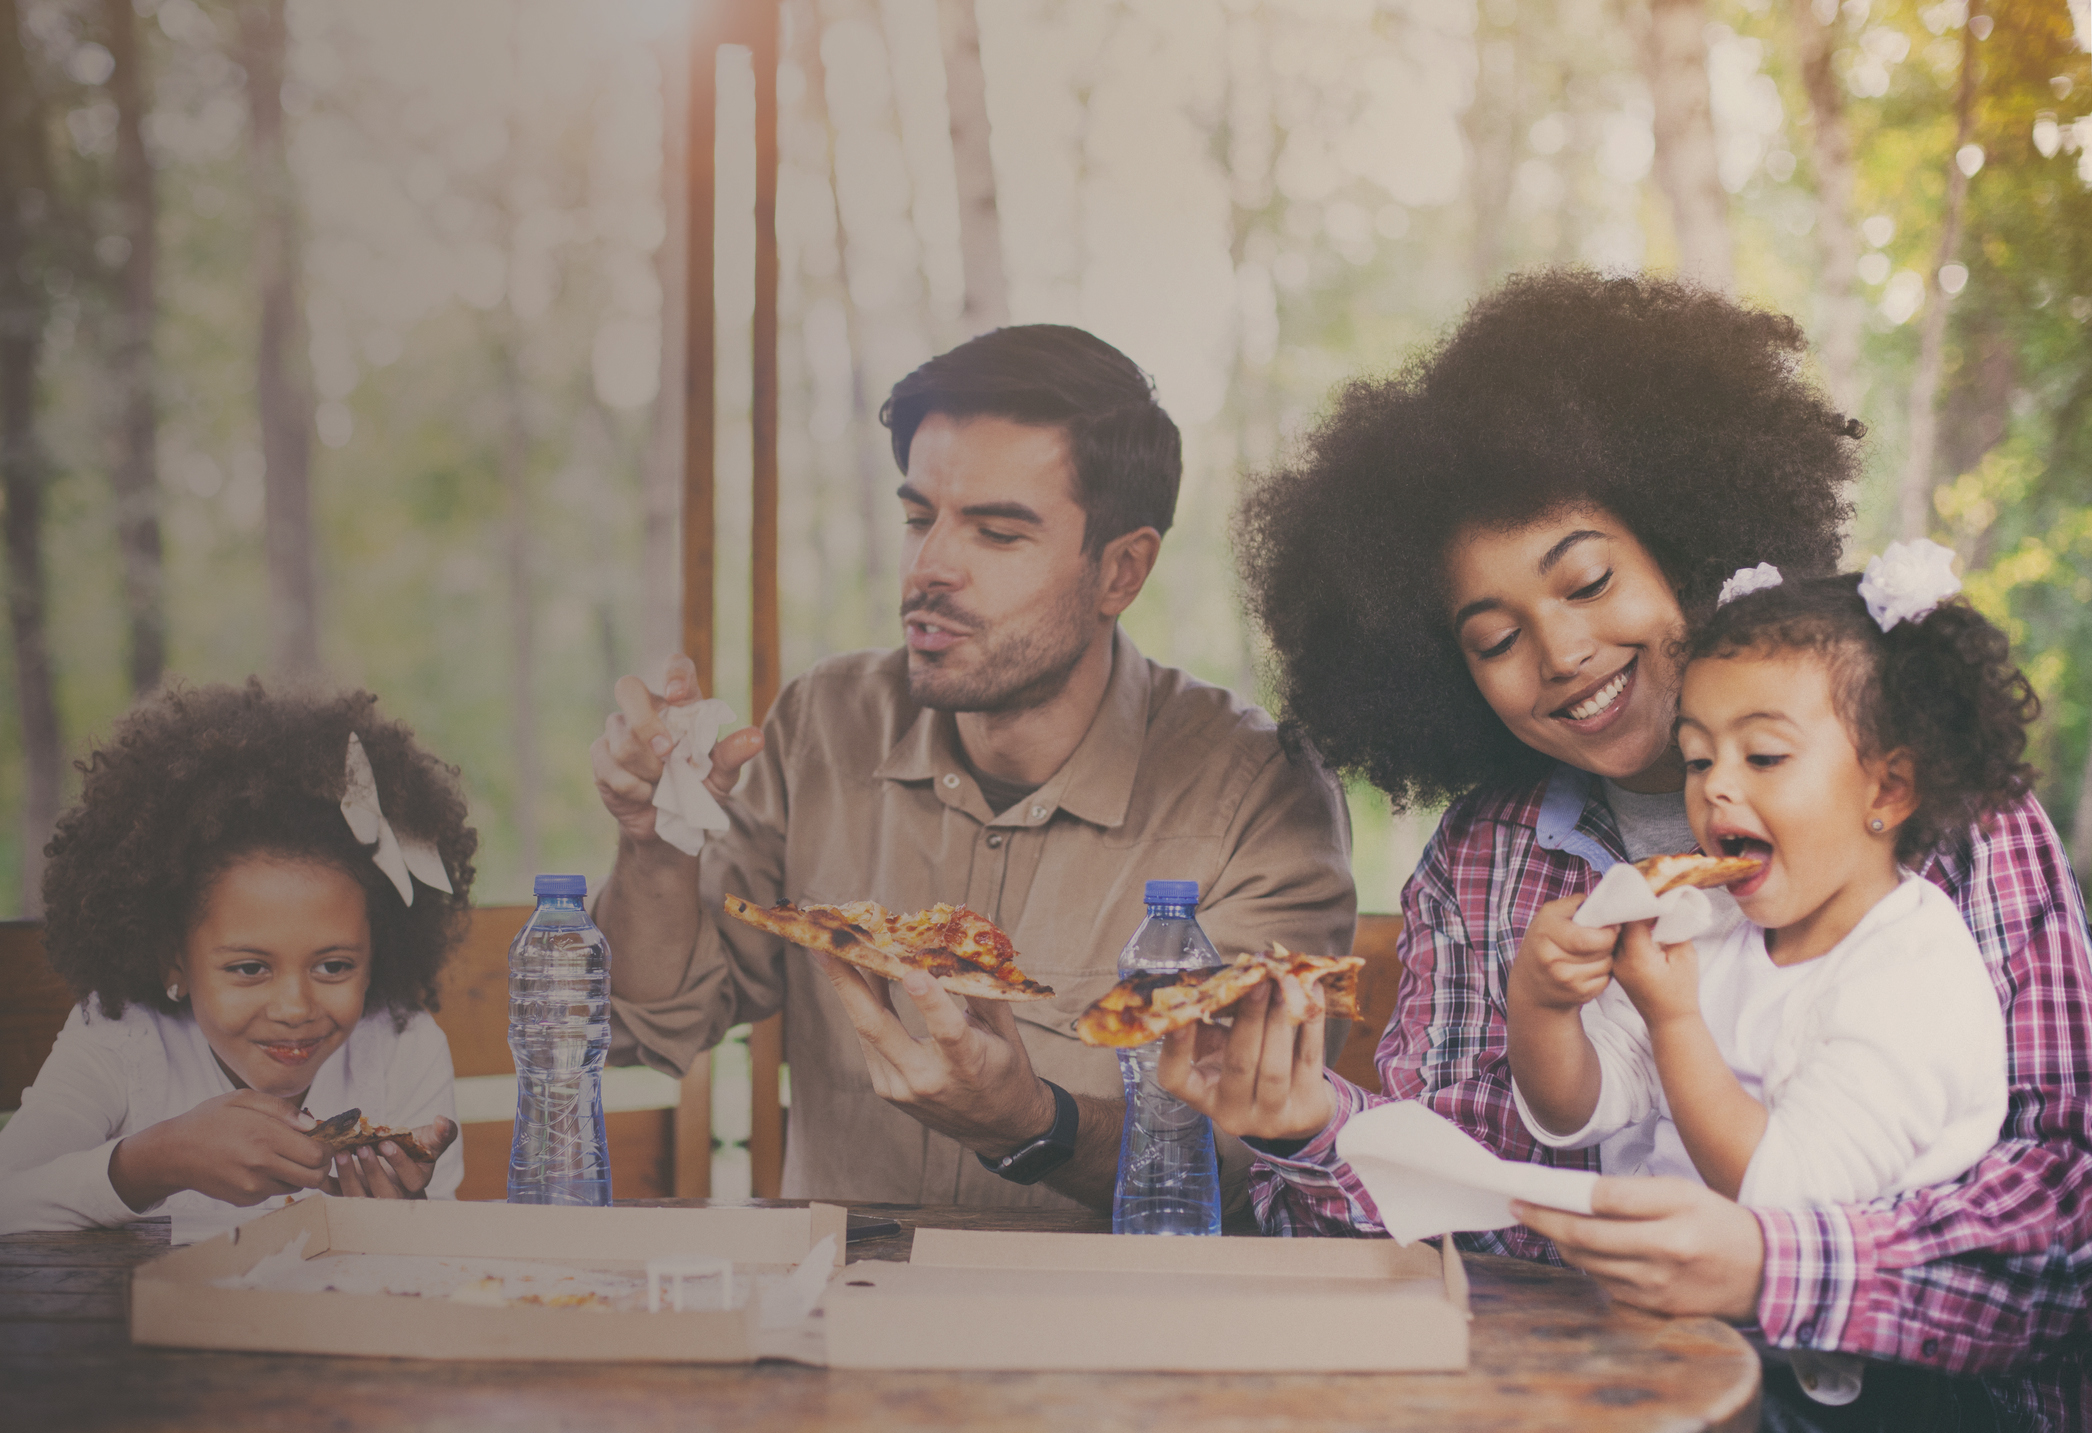 Family eating pizza outdoor together